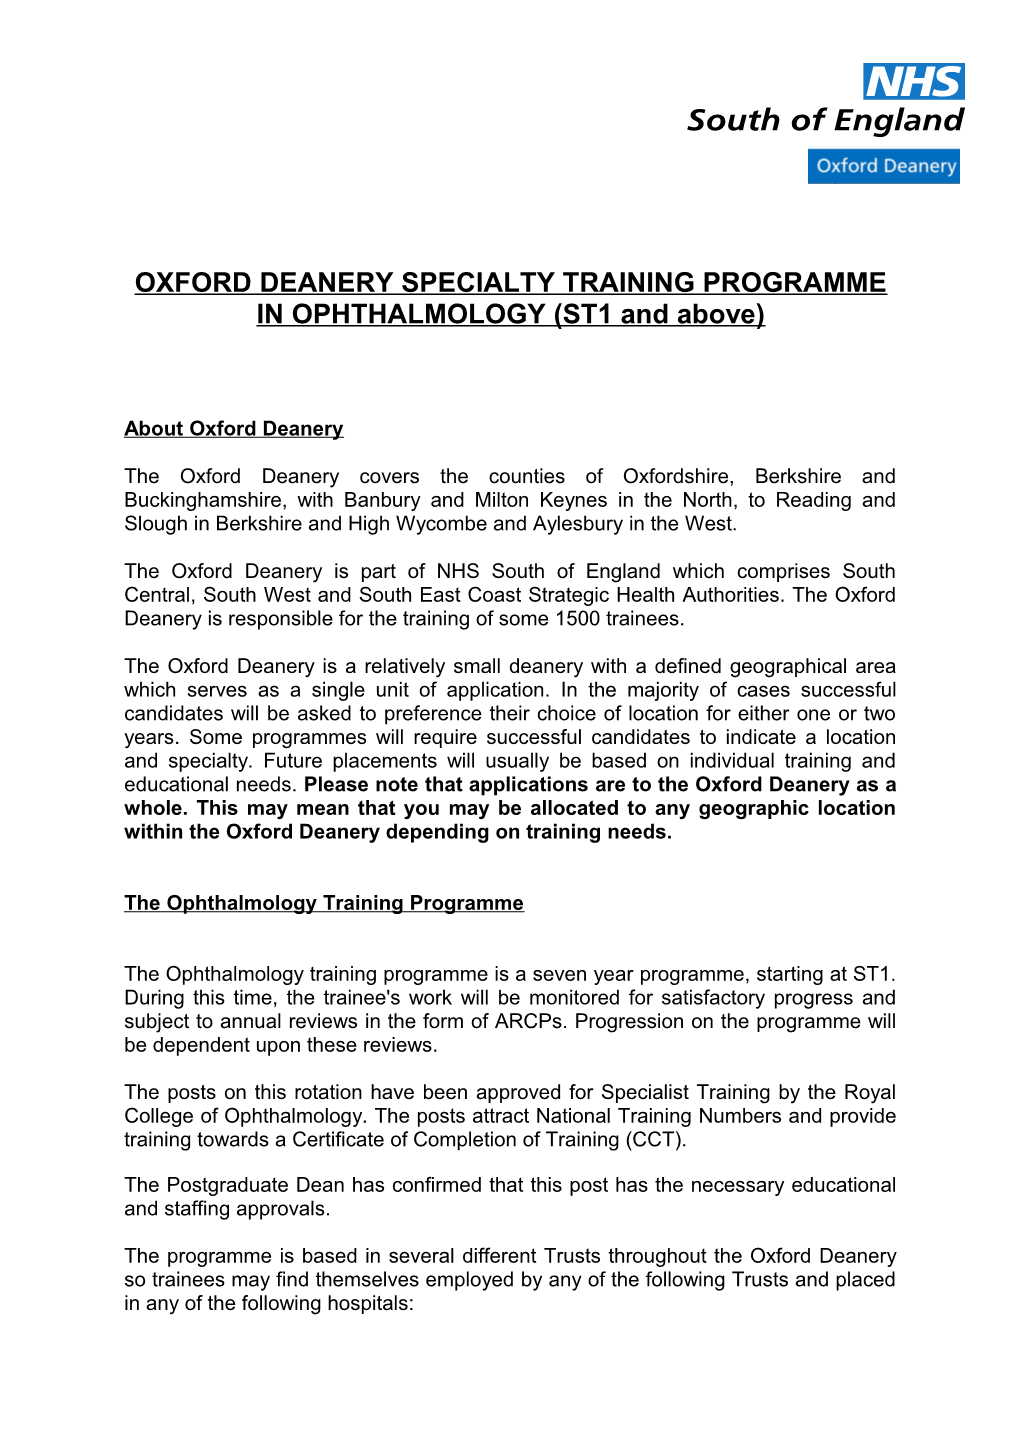 OXFORD DEANERY SPECIALTY TRAINING PROGRAMME in Ophthalmology